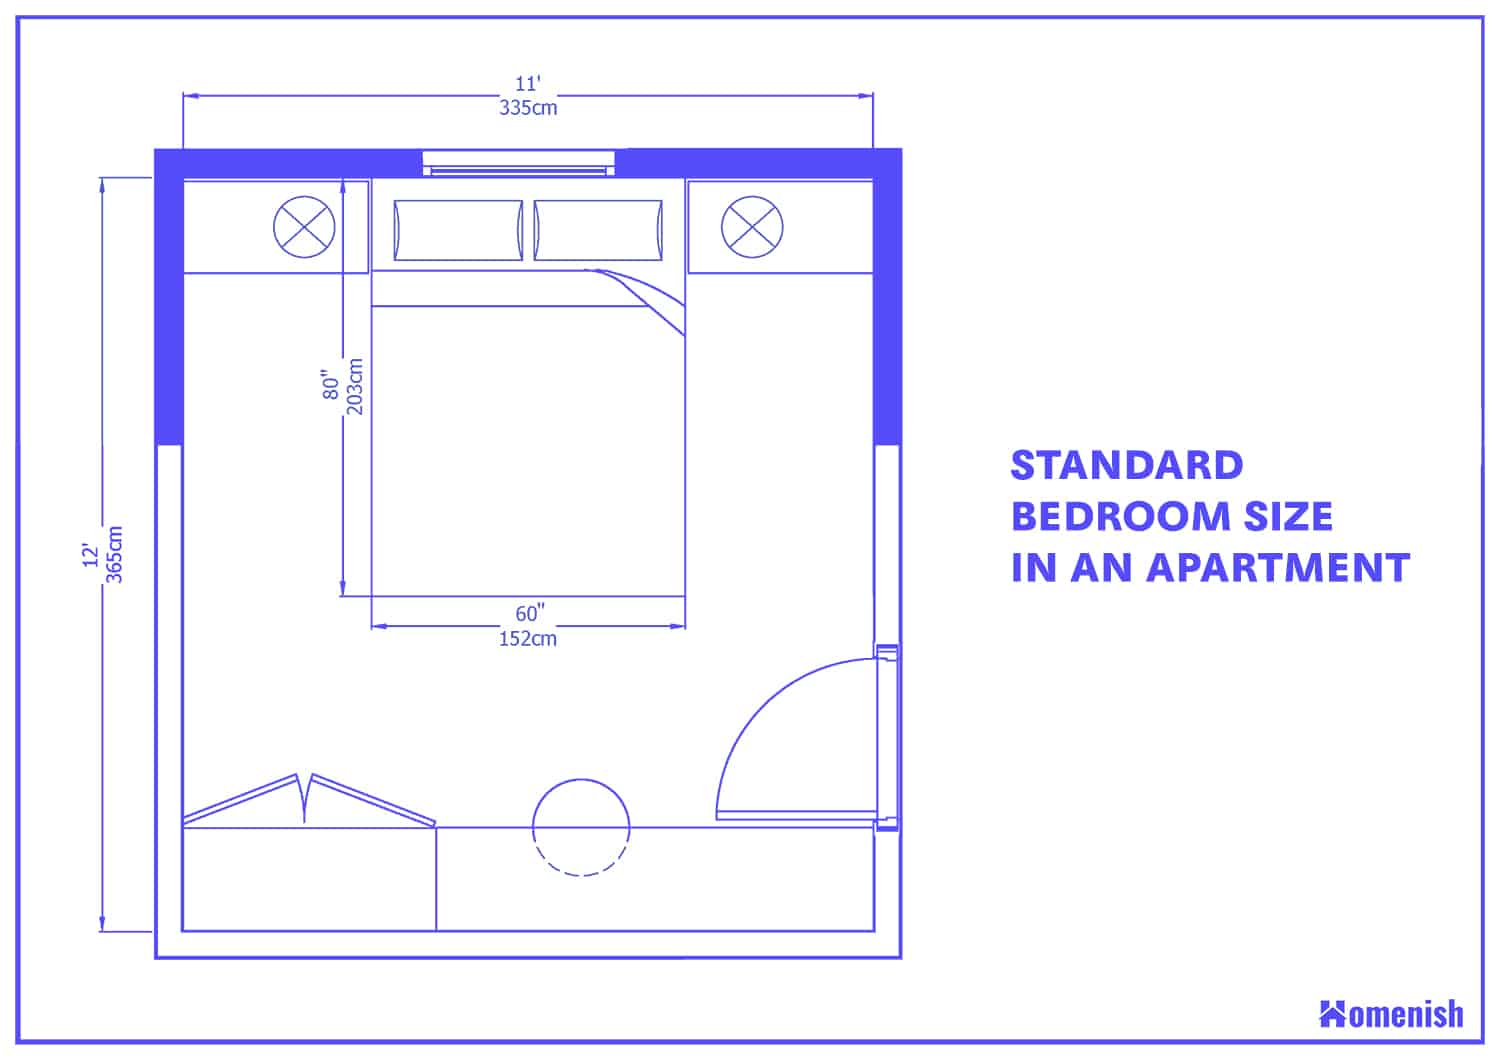 Average Bedroom Size For 9 Bedroom Layouts (with Diagrams